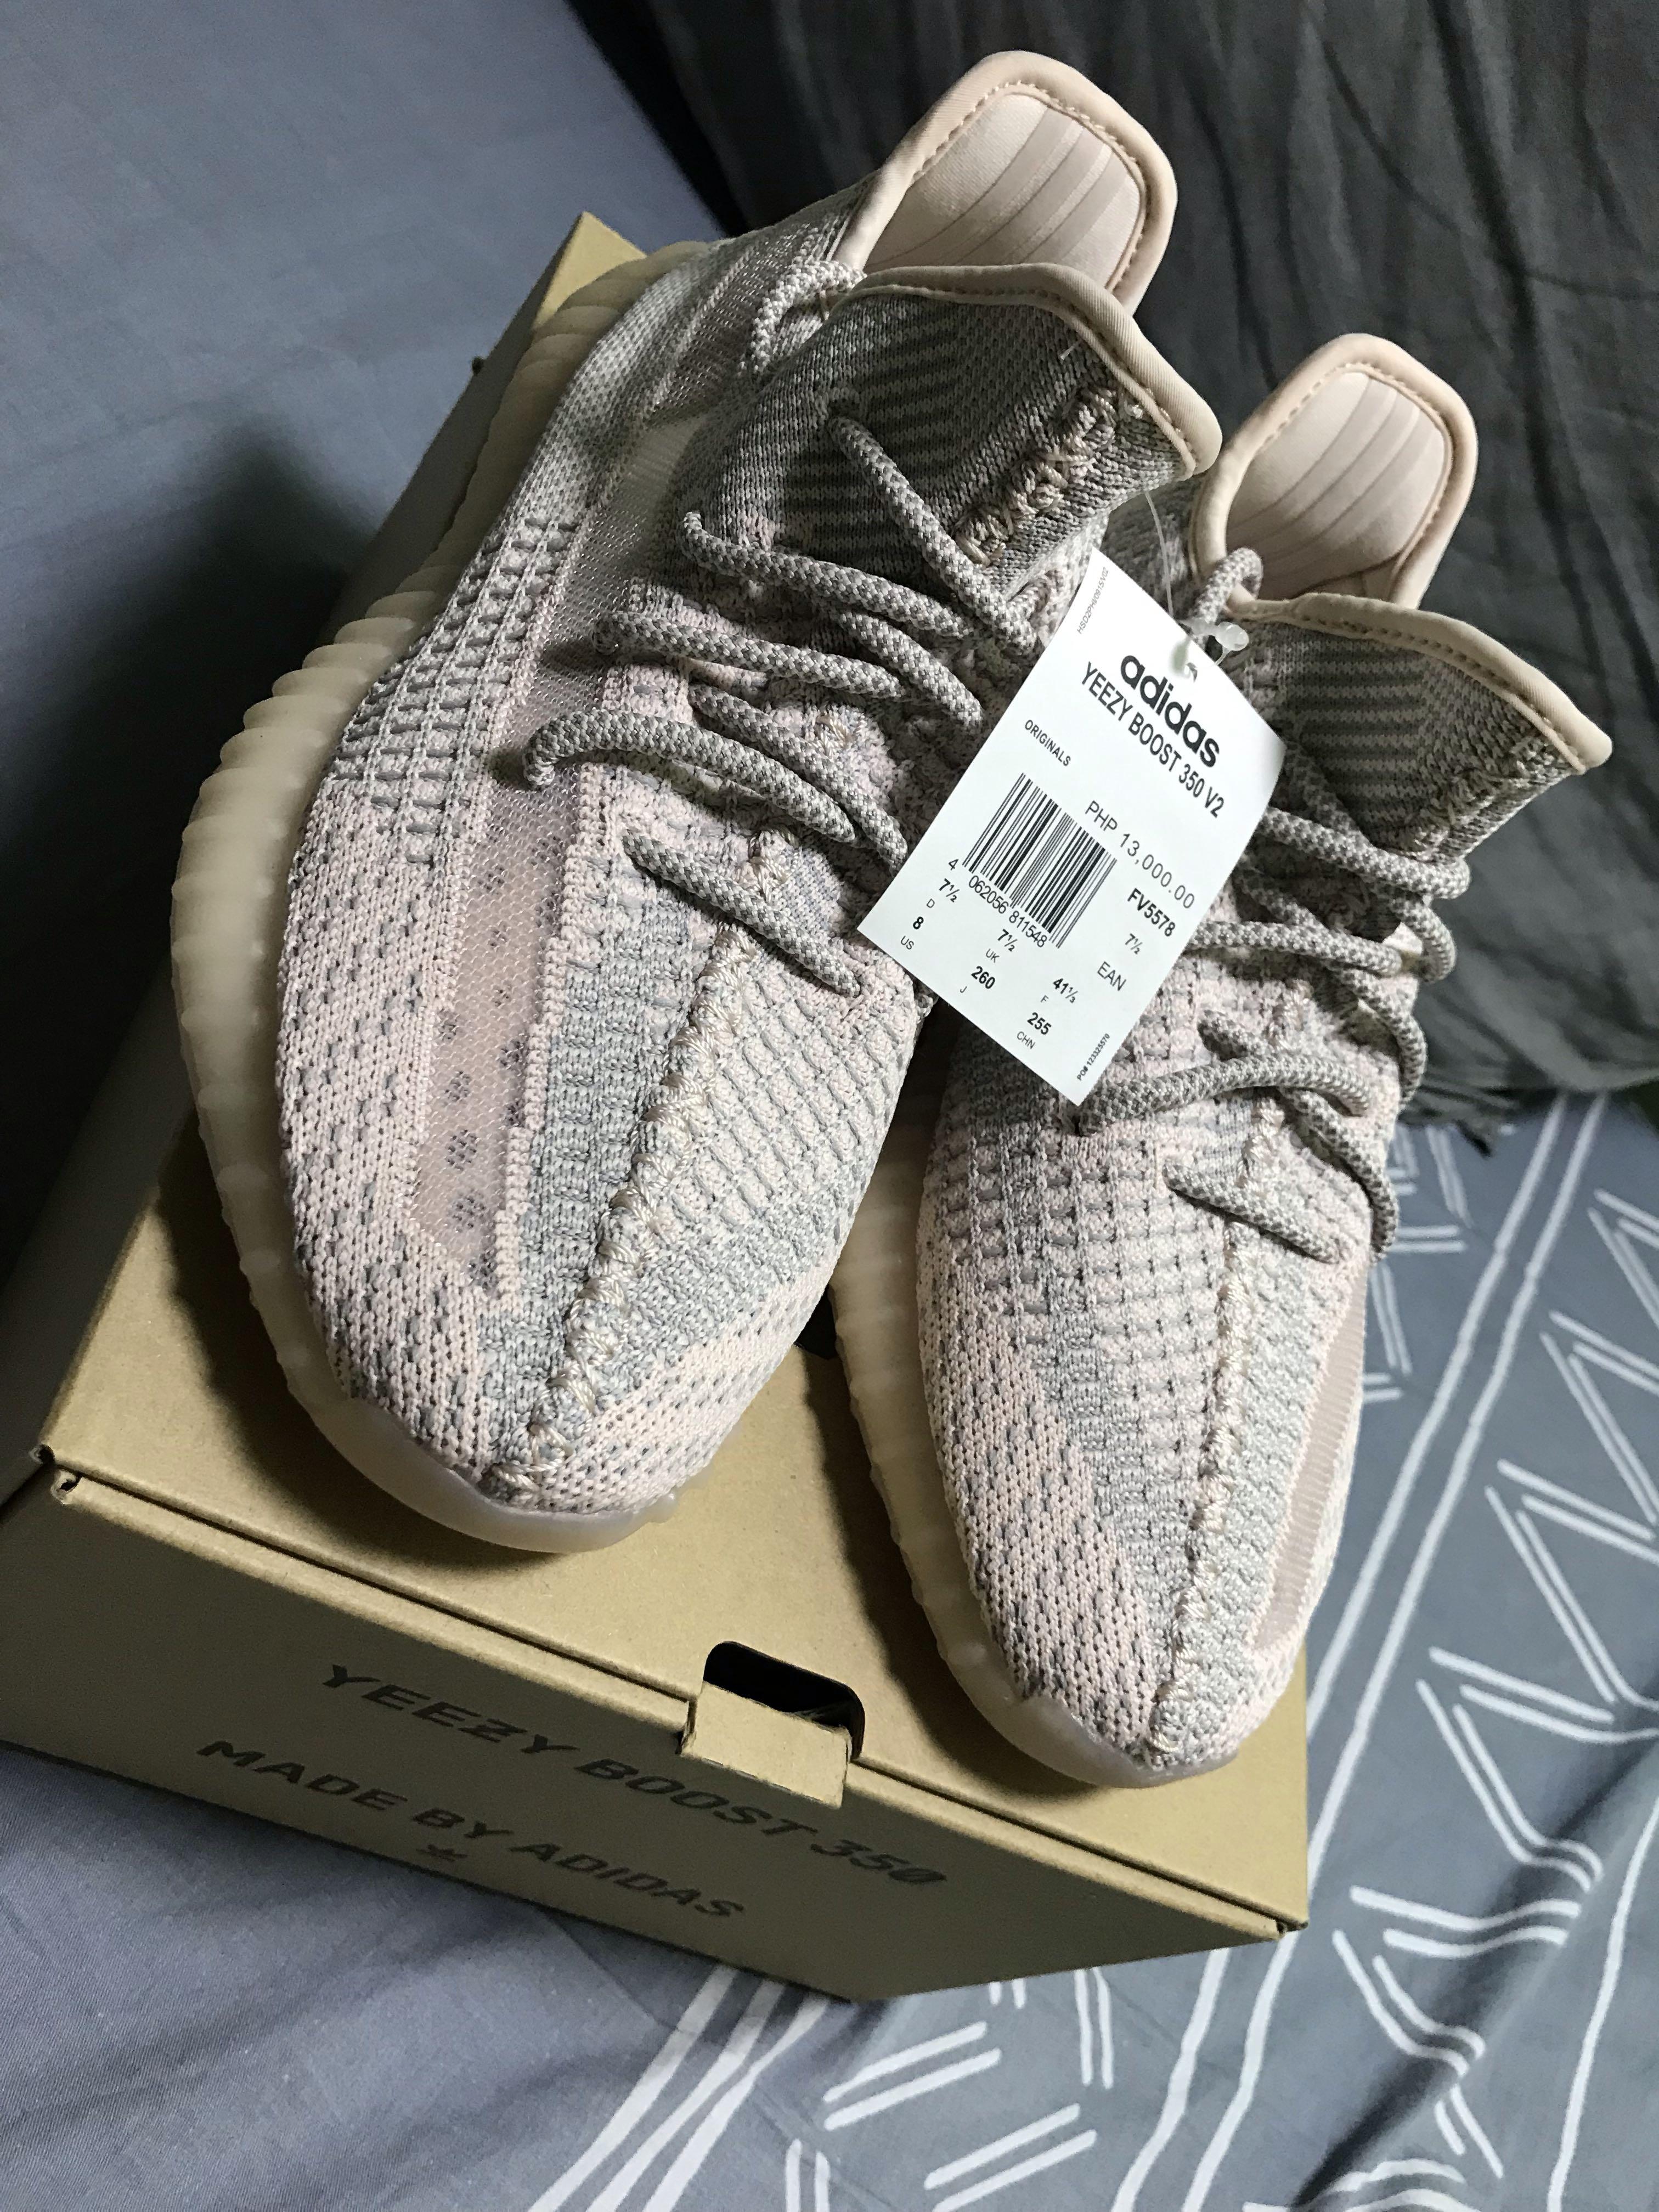 Adidas Yeezy Boost 350 V2 Synth (Non- Reflective)